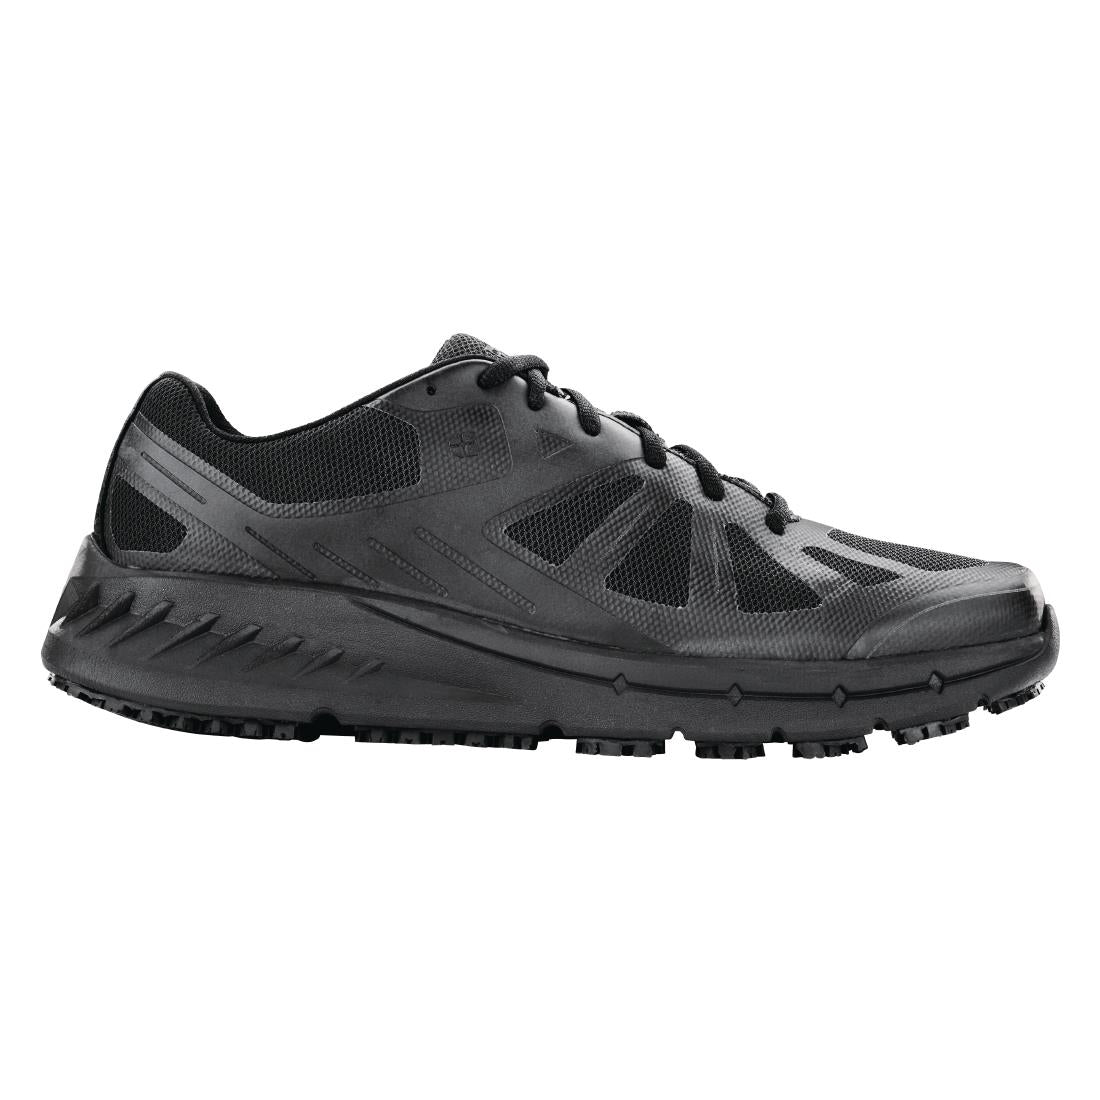 BB599-45 Shoes for Crews Endurance Trainers Black Size 45